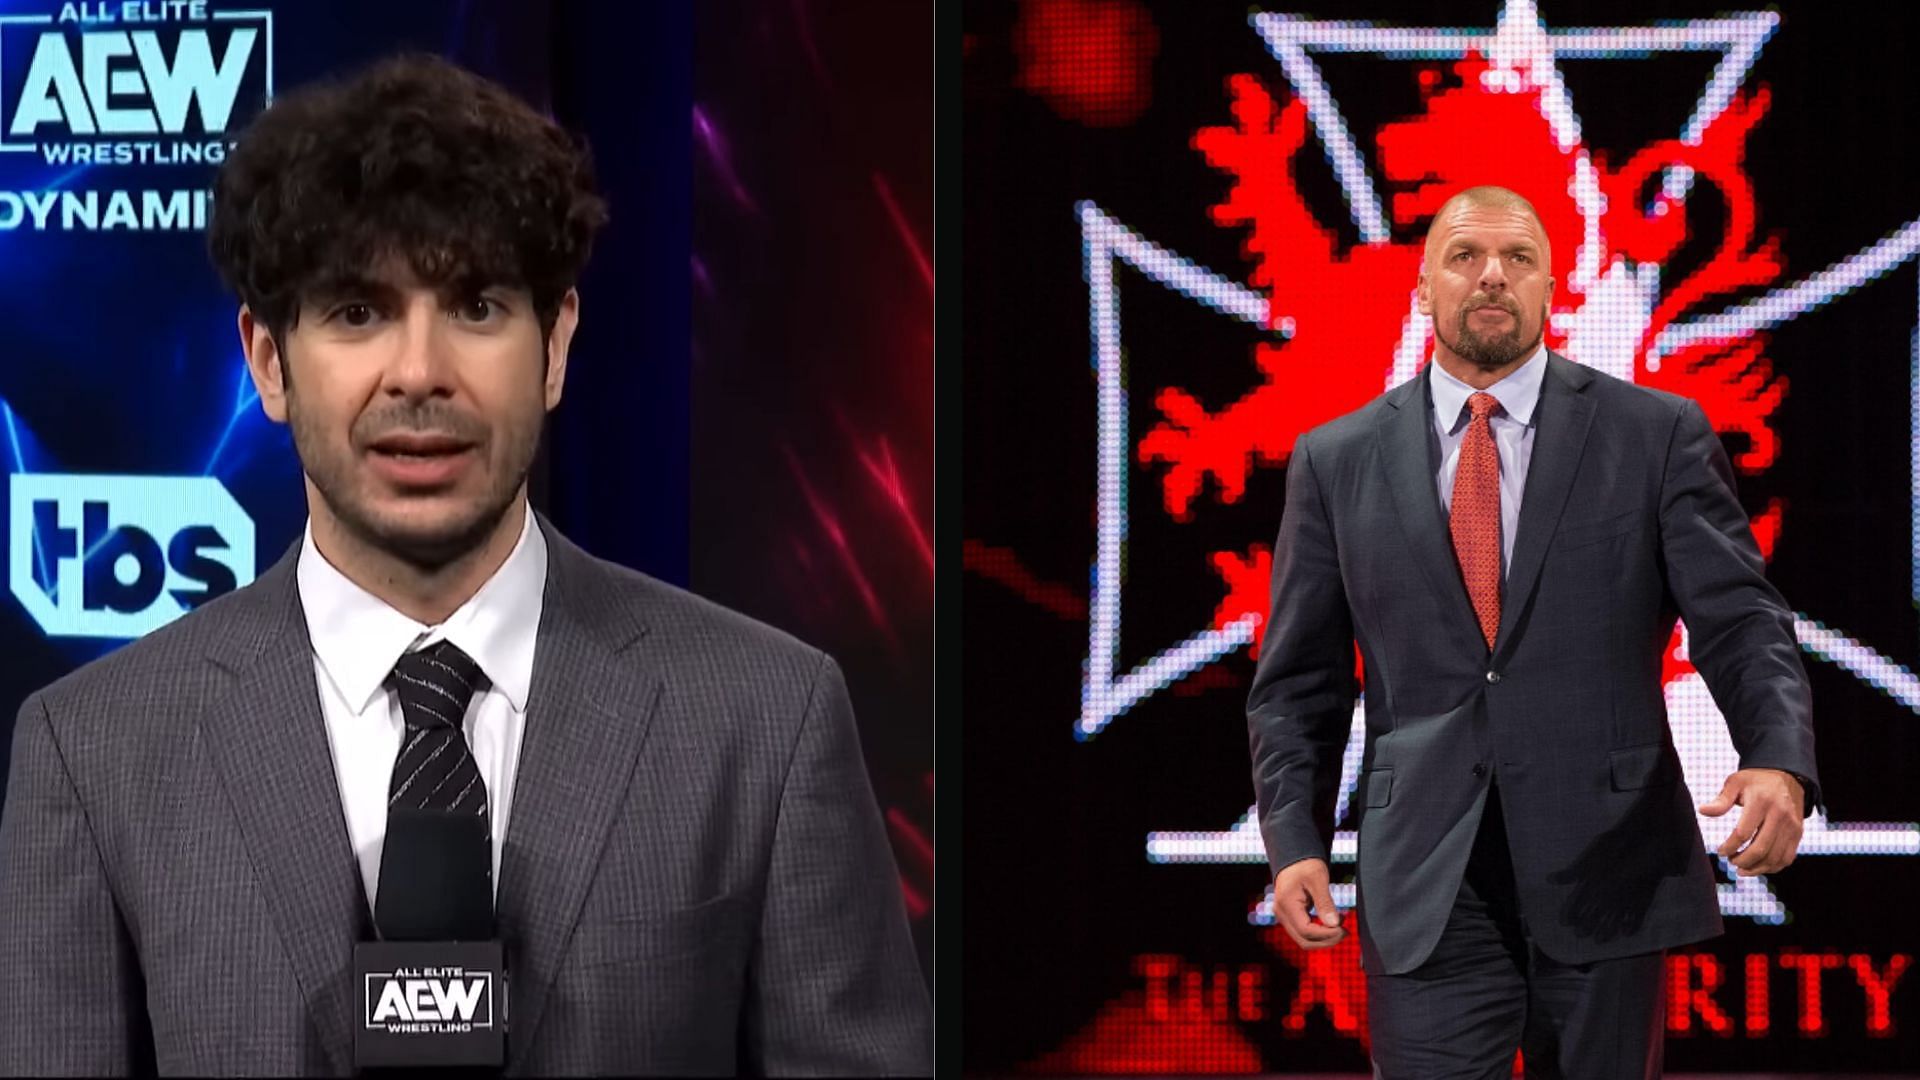 Tony Khan and Triple H are the respective Creative Heads of AEW and WWE